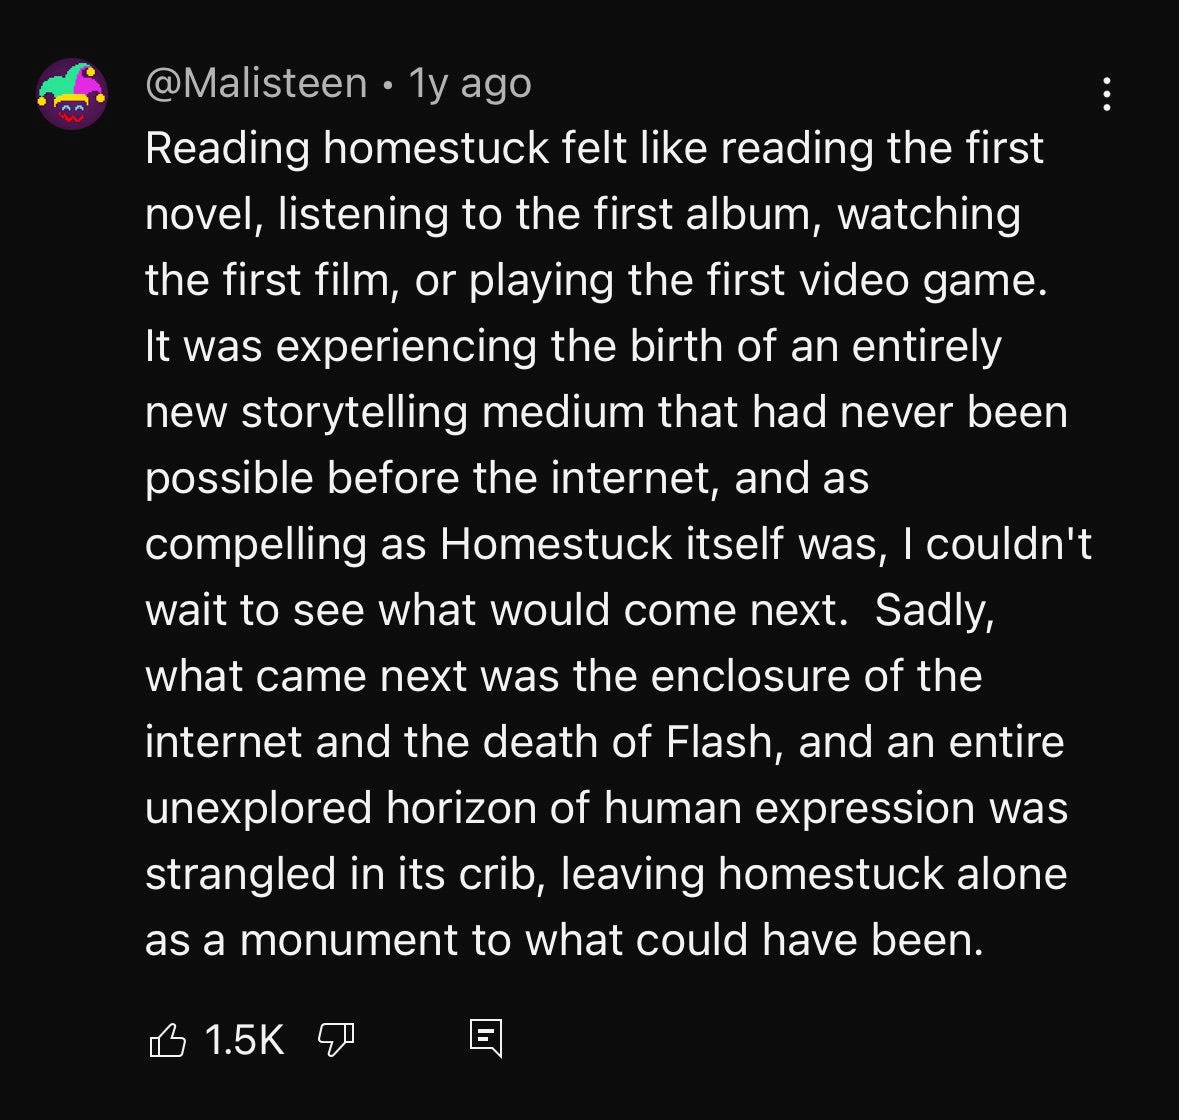 YouTube comment that reads: "Reading homestuck felt like reading the first novel, listening to the first album, watching the first film, or playing the first video game. It was experiencing the birth of an entirely new storytelling medium that had never been possible before the internet, and as compelling as Homestuck itself was, I couldn't wait to see what would come next. Sadly, what came next was the enclosure of the internet and the death of Flash, and an entire unexplored horizon of human expression was strangled in its crib, leaving homestuck alone as a monument to what could have been."